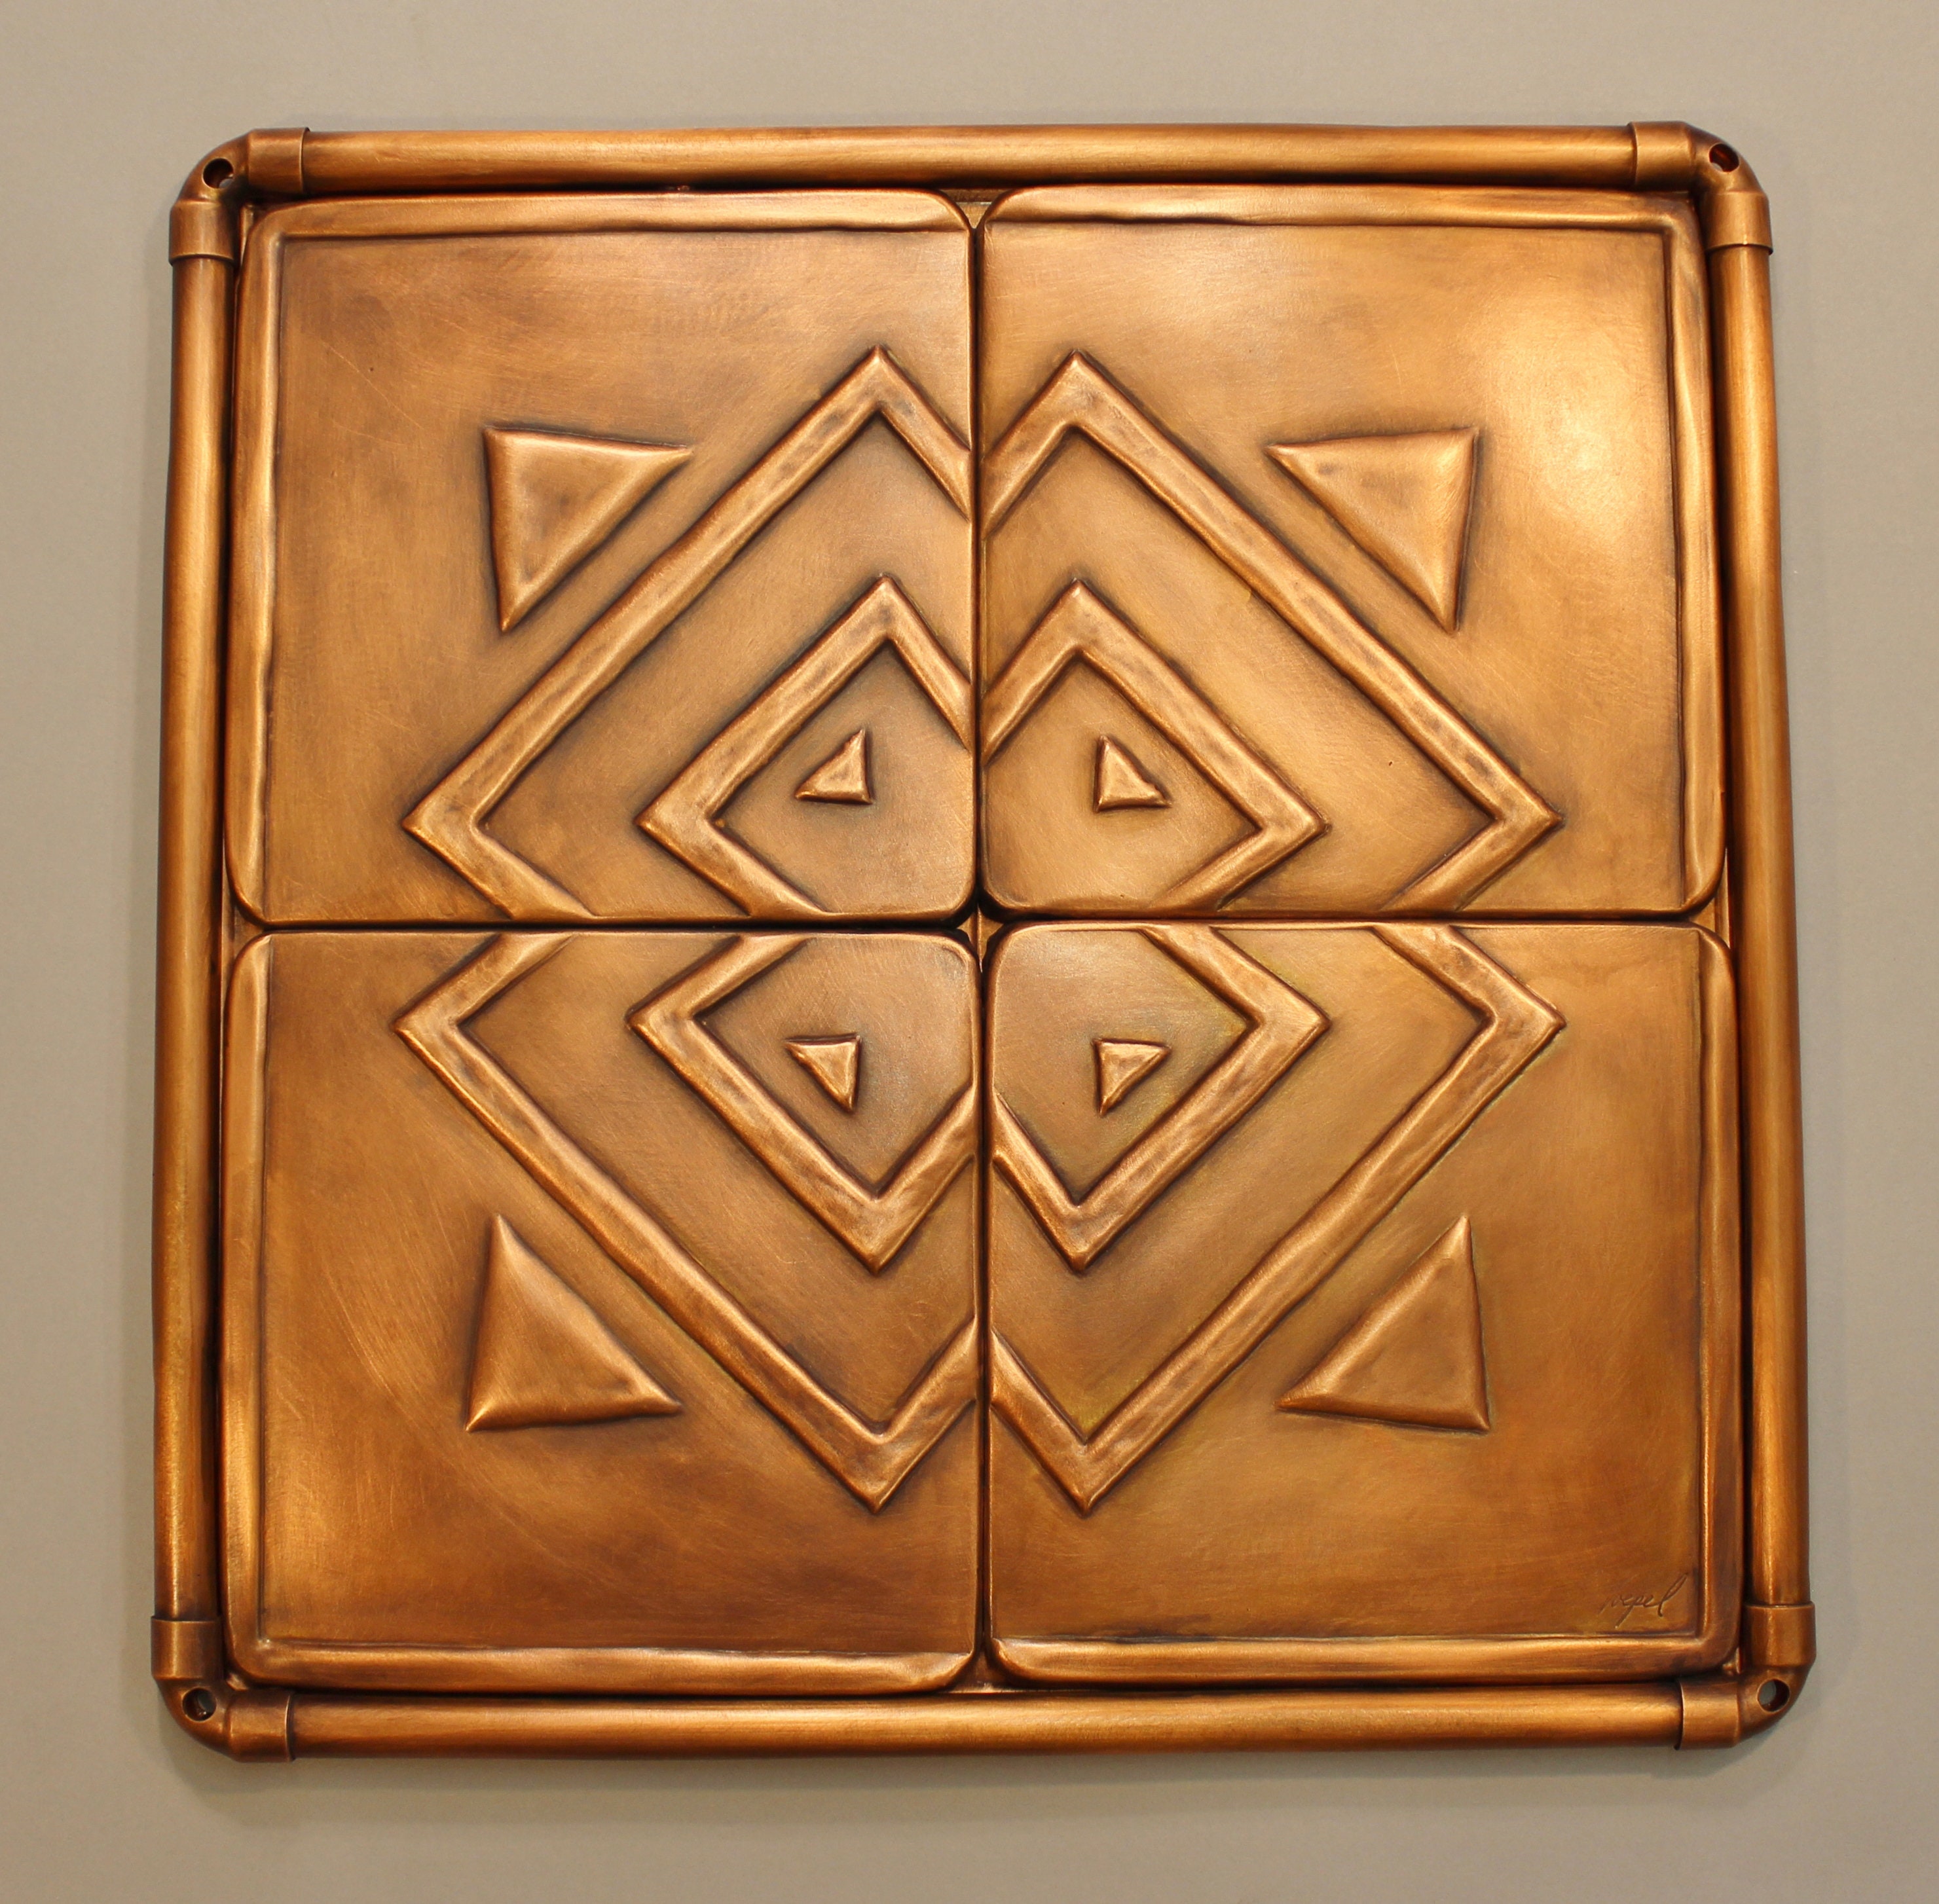 Ready to Hang 13 18 Square Set of 4 Copper Tiles Framed Southwest Tiles Handmade by Monte Voepel.